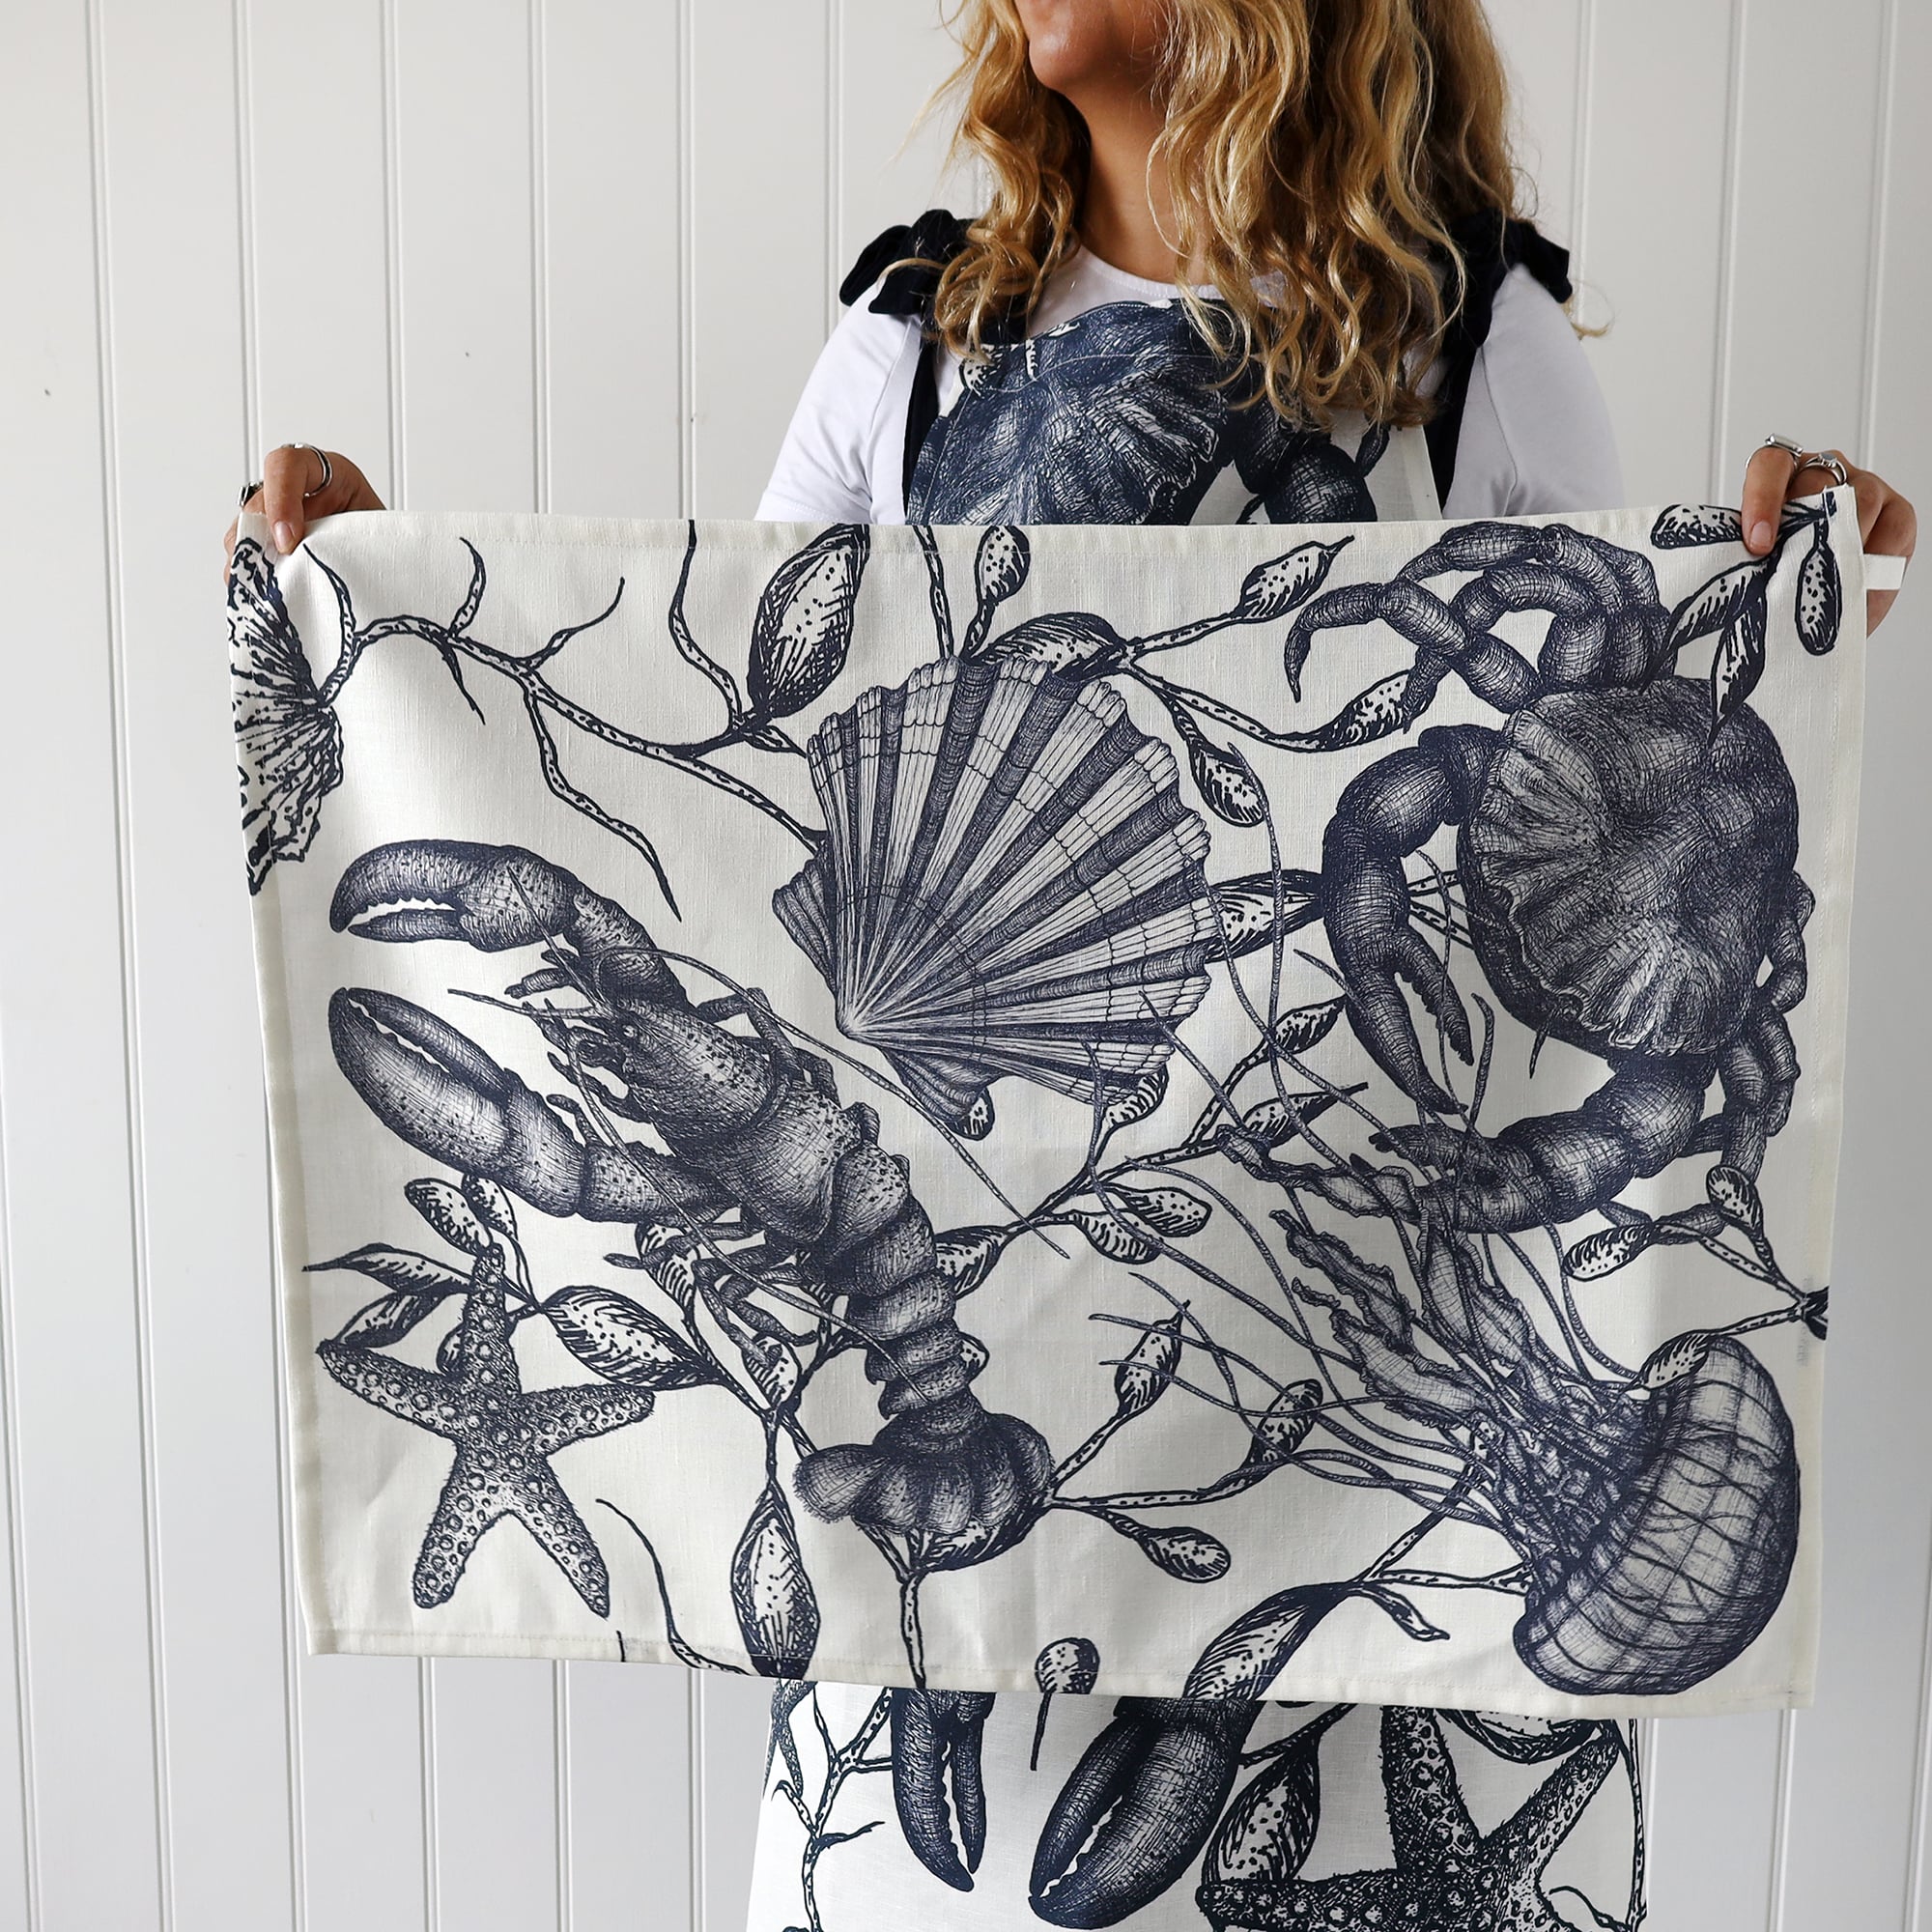 Model wearing our Sea creature Apron holding a matching tea towel